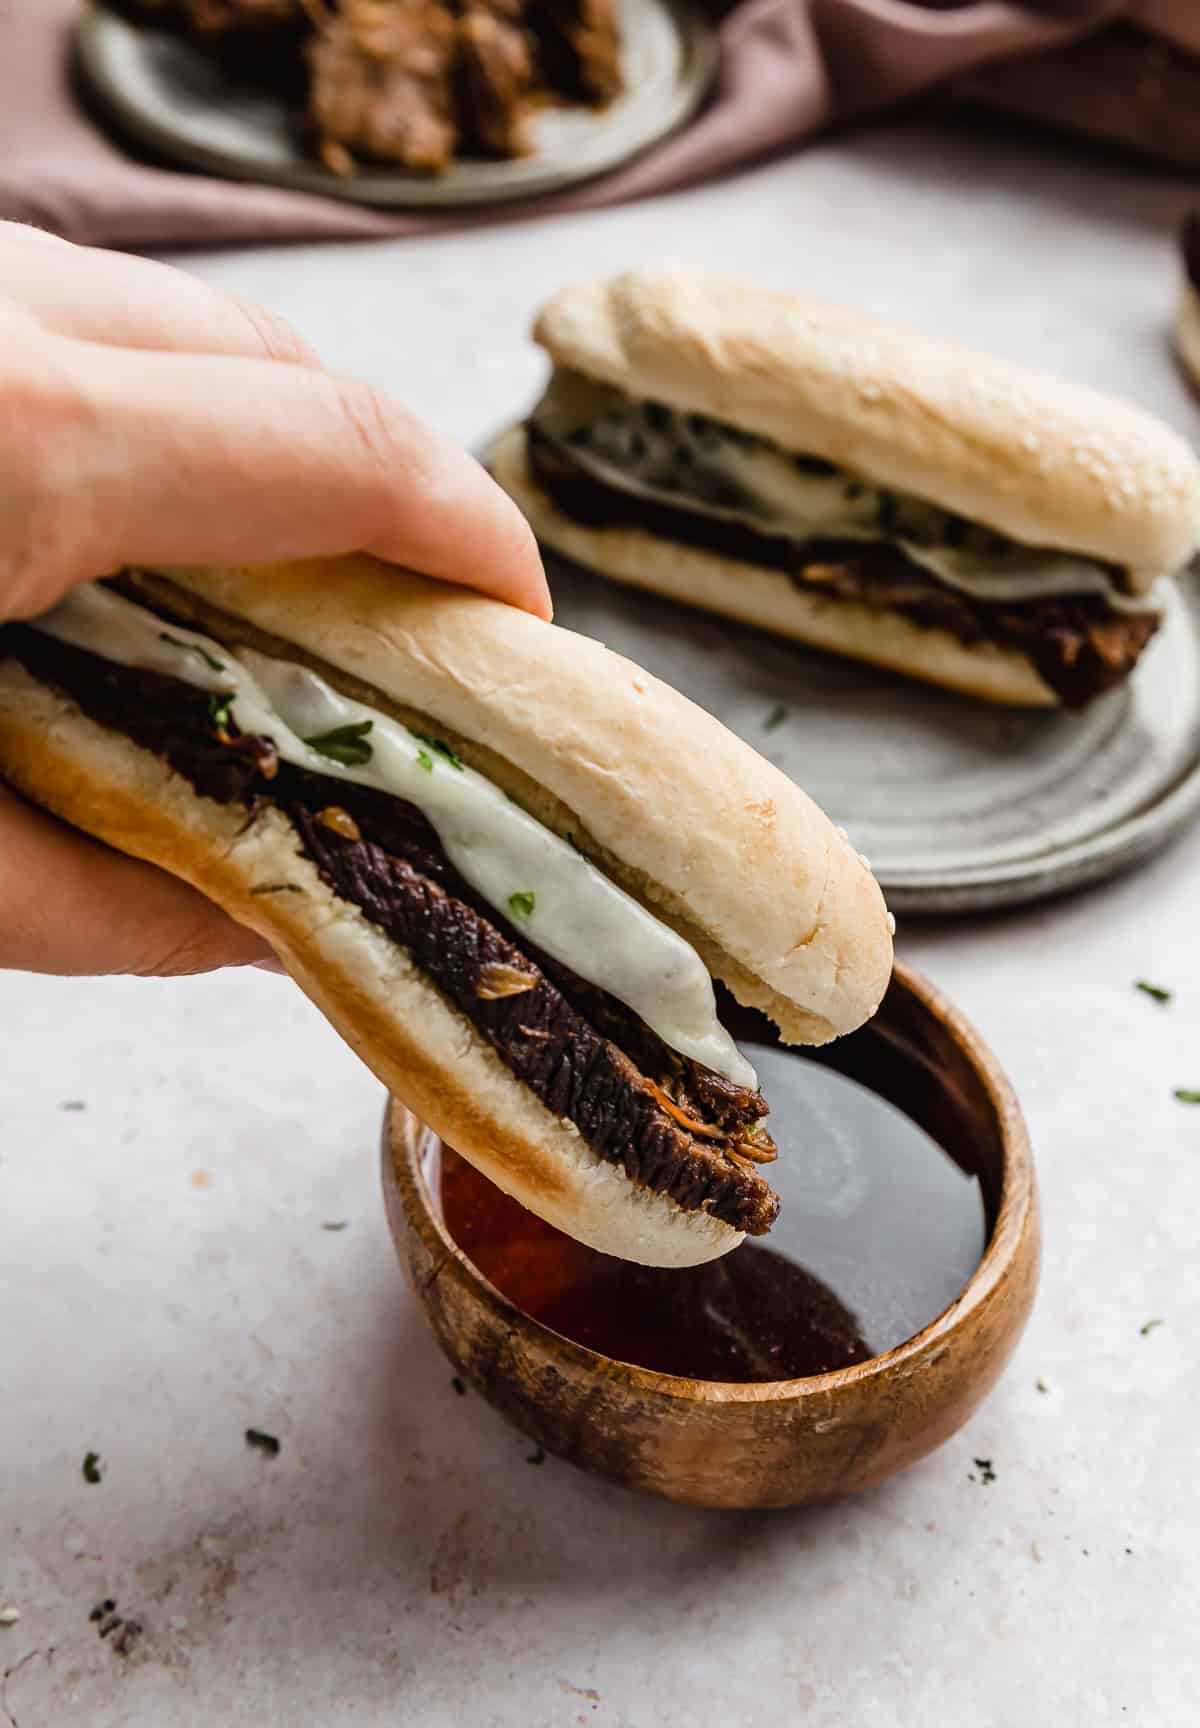 A tender French dip sandwich topped with provolone cheese being dipped into a brown bowl full of au juice.